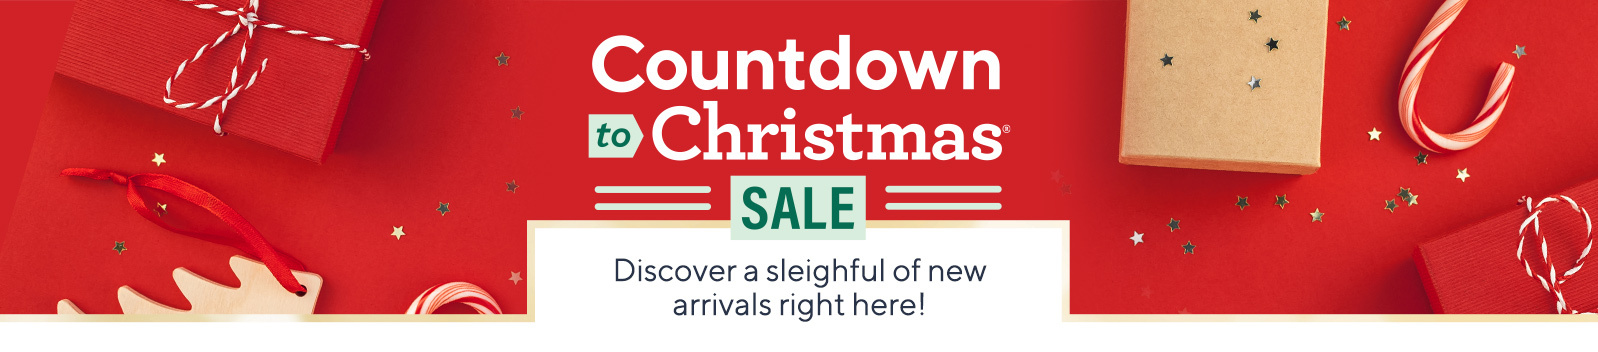 Countdown to Christmas® Sale Discover a sleighful of new arrivals right here! 